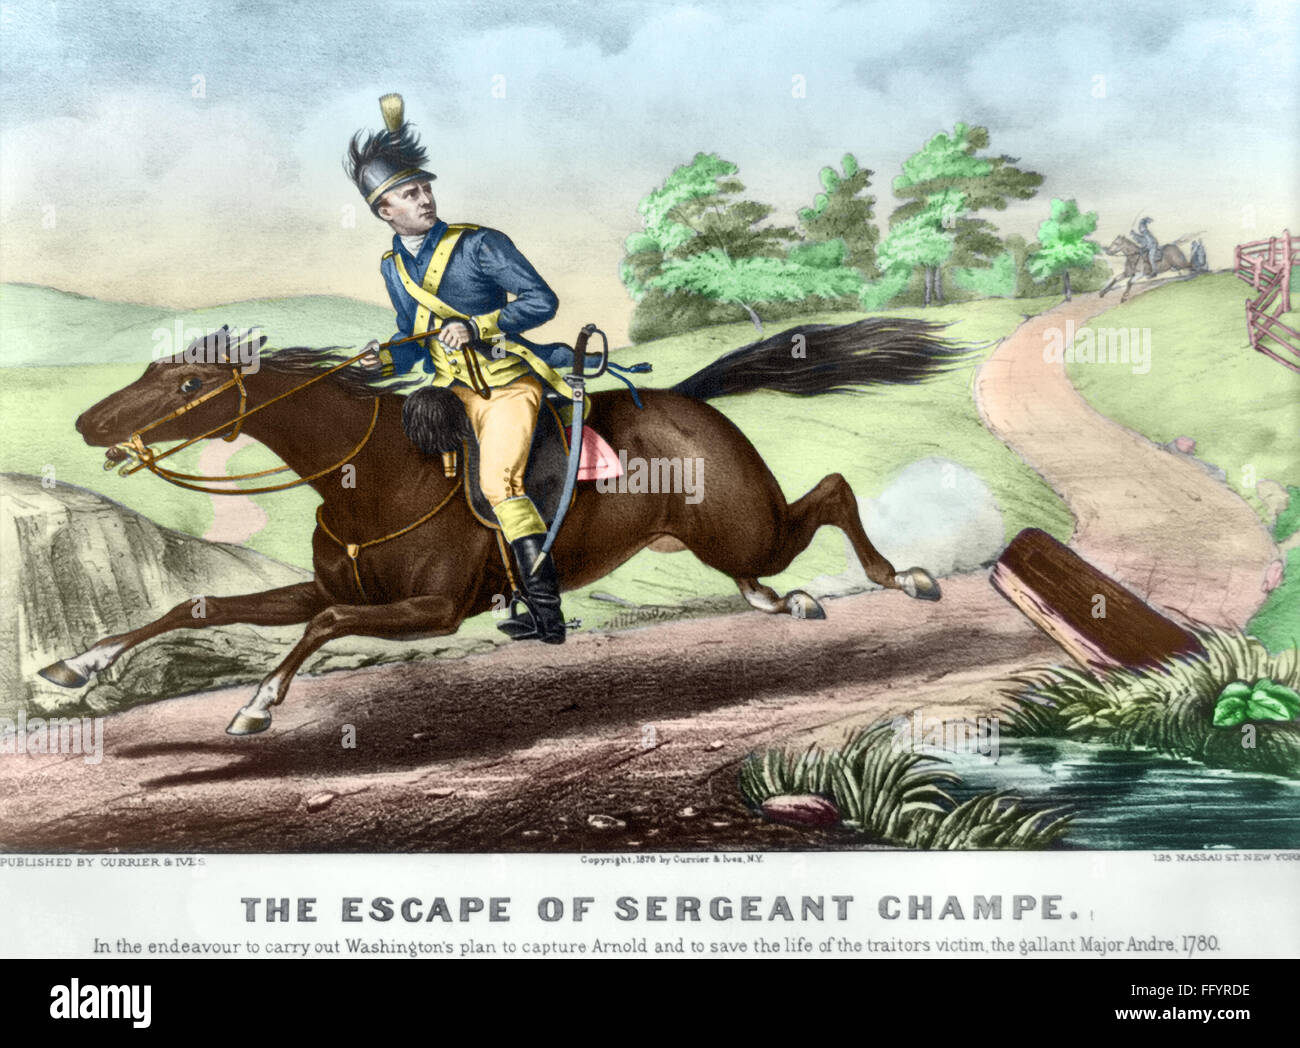 JOHN CHAMPE (1752-1798). /nSergeant Major in the Continental Army. 'The Escape of Sergeant Champe' from an American patrol, in order to fake his desertion and so begin an assignment as a double agent in an attempt to capture Benedict Arnold, October 1780. Stock Photo